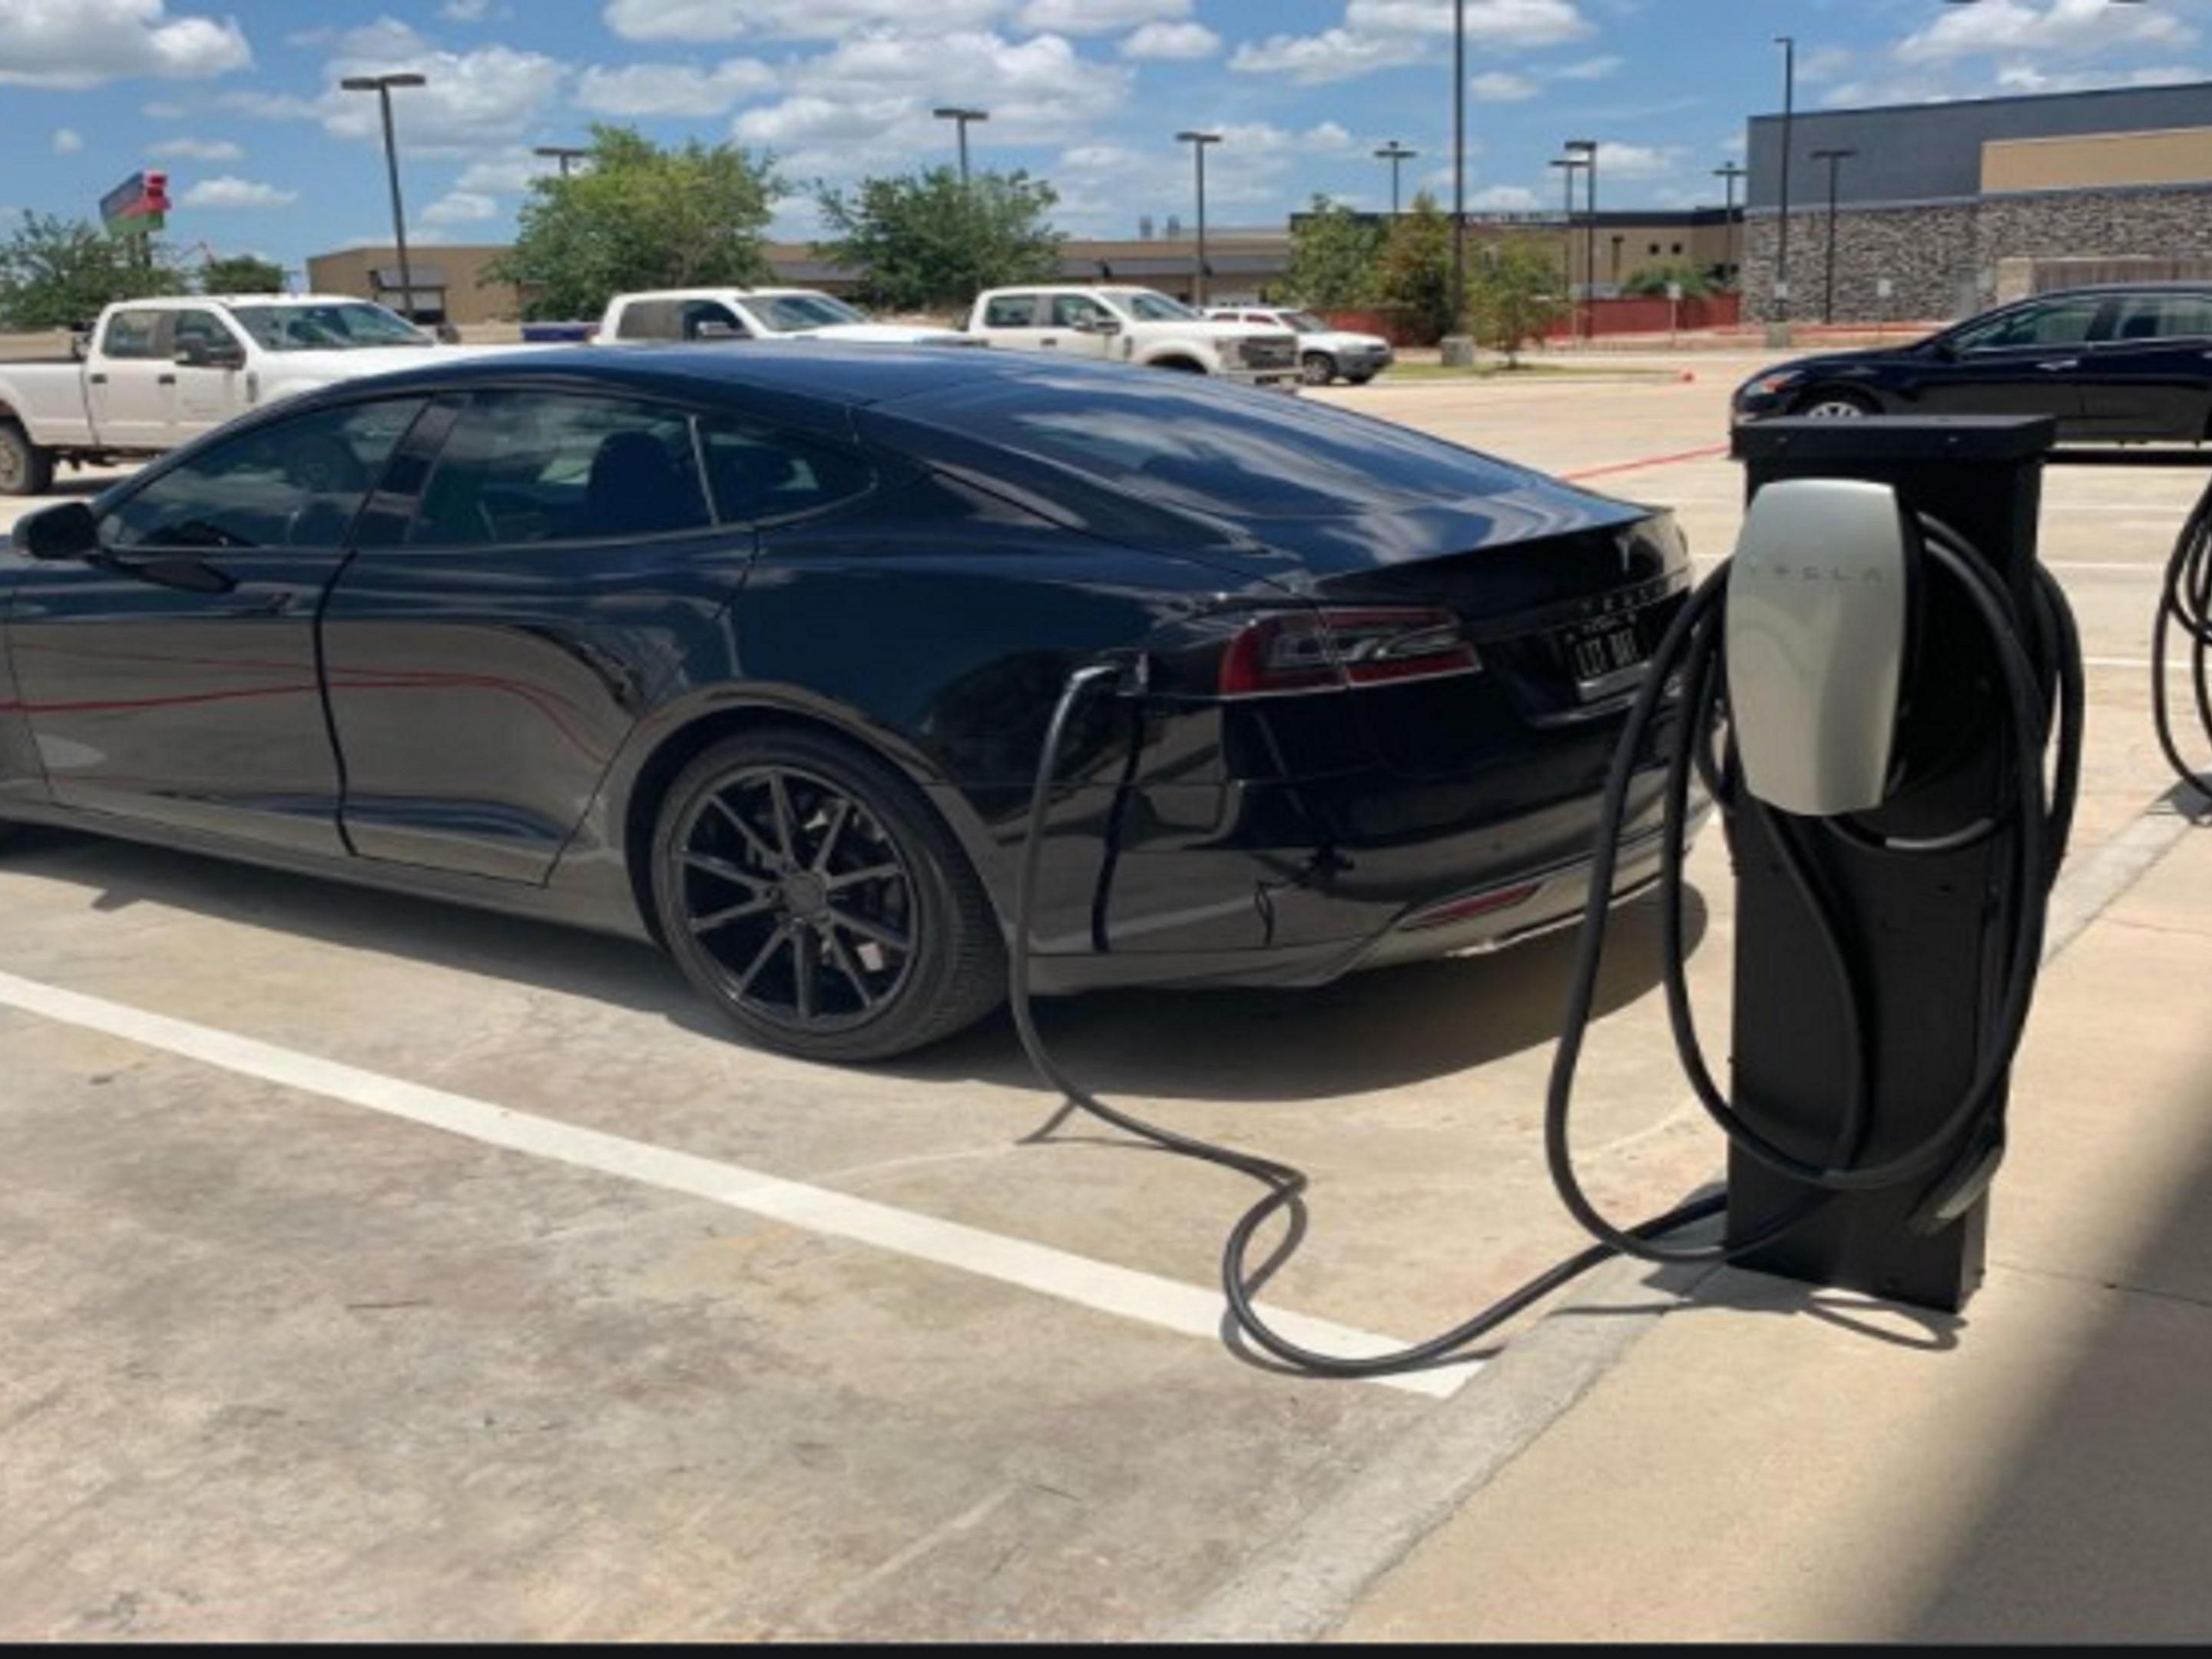 Overnight guests charge up for free with our 3 Tesla Supercharger stations and one Universal charger. You’ll never worry about not having enough juice for your car.  After check in, just look out for our Tesla vehicle charging sign, pull up, charge, and enjoy your stay with us! 